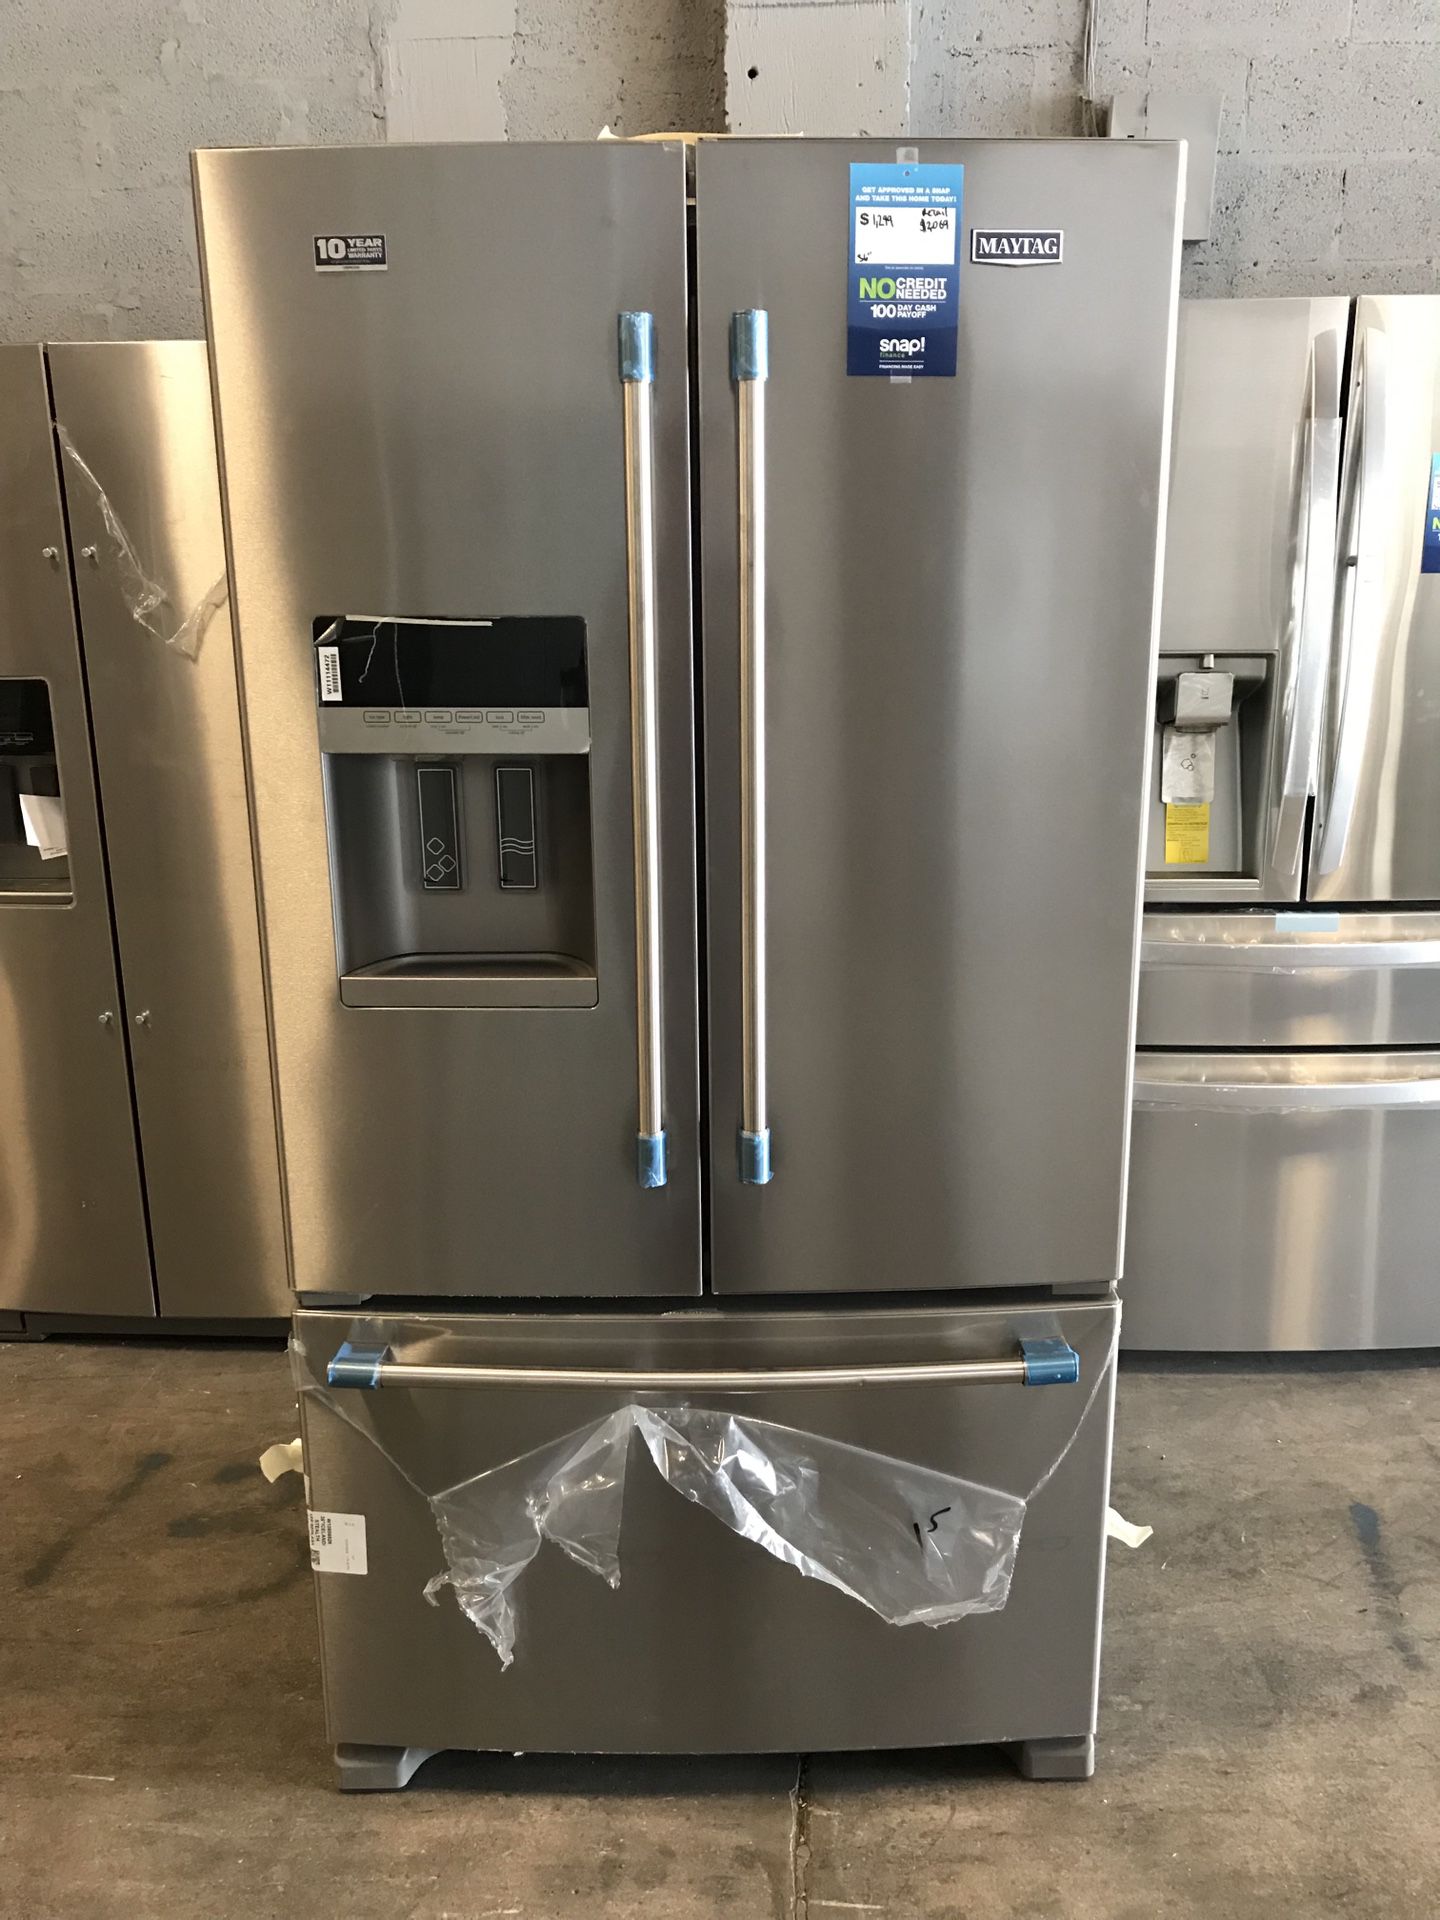 Maytag 25 cu. ft. French Door Refrigerator EZ NO CREDIT CHECK FINANCING AVAILABLE